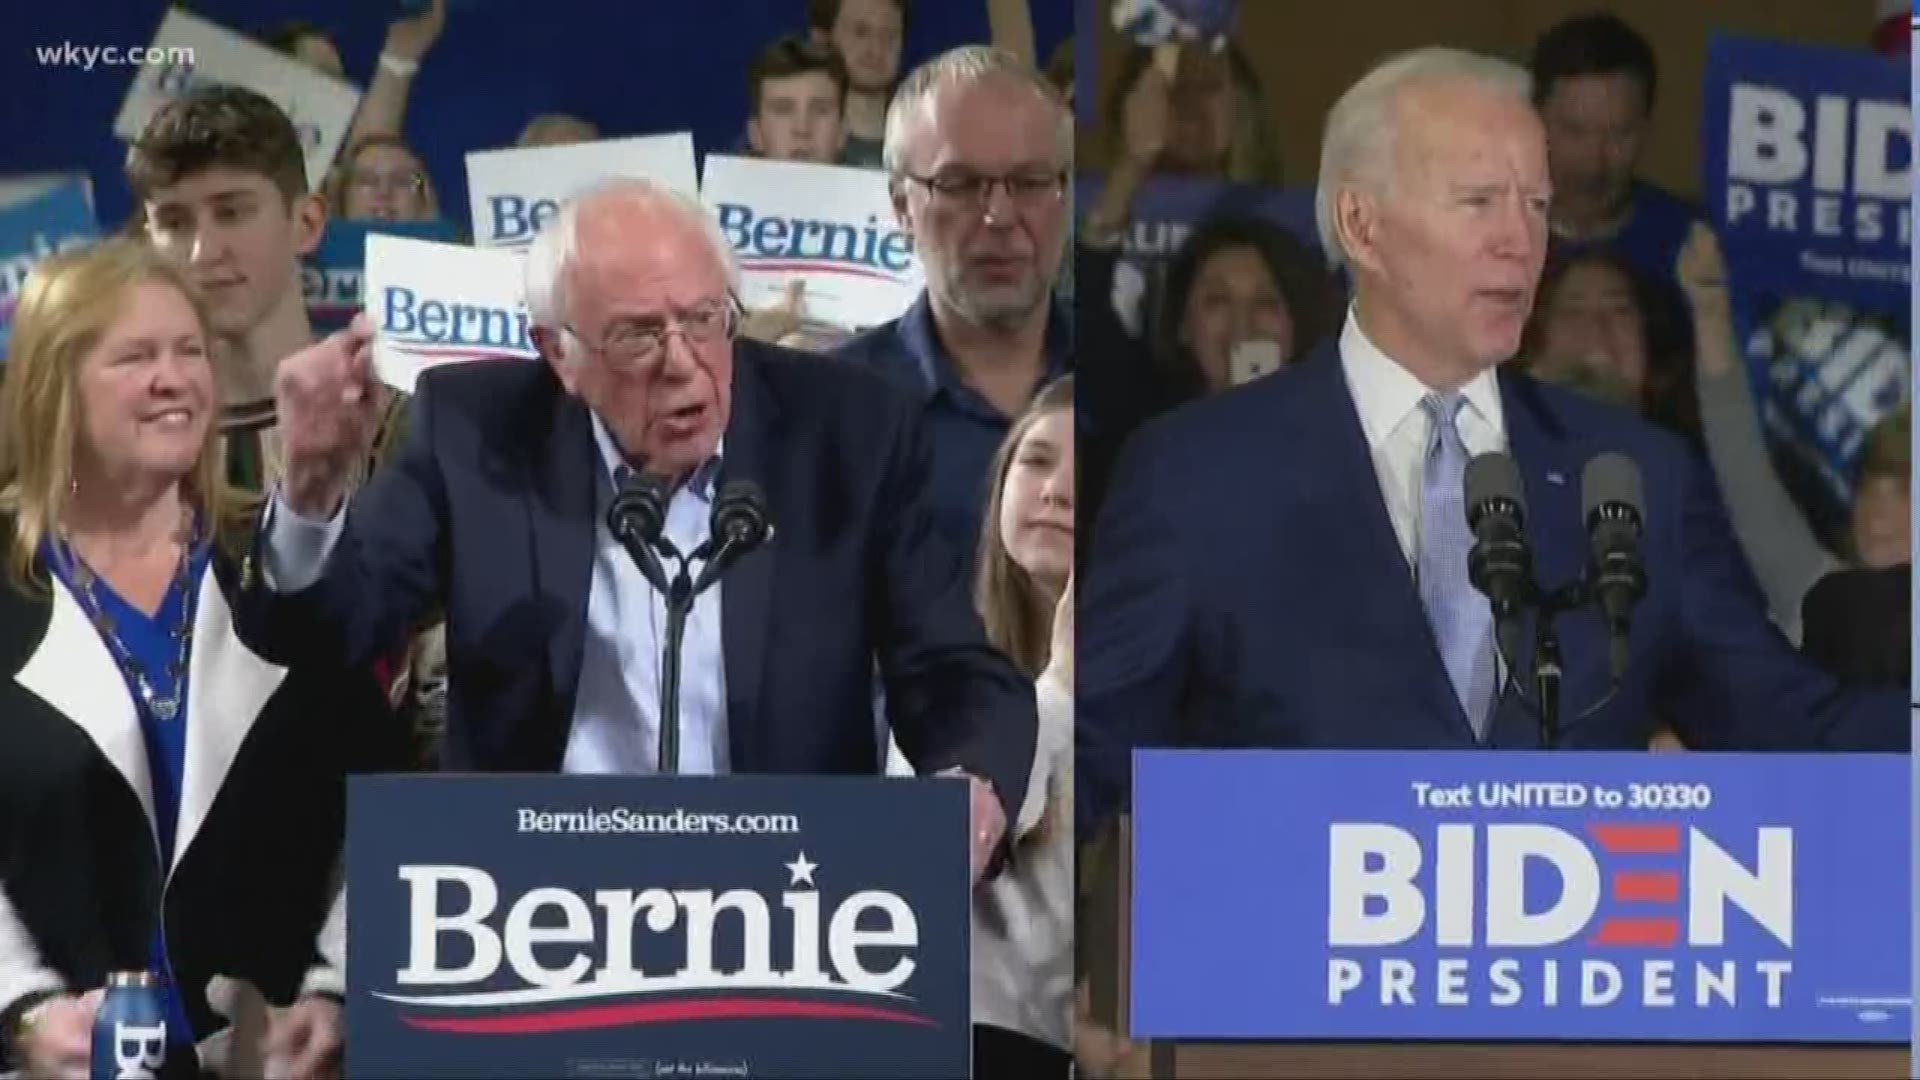 What was supposed to be a political showdown fell silent Tuesday night. Joe Biden and Bernie Sanders cancelled their rallies, 3News' Mark Naymik tells us what's next